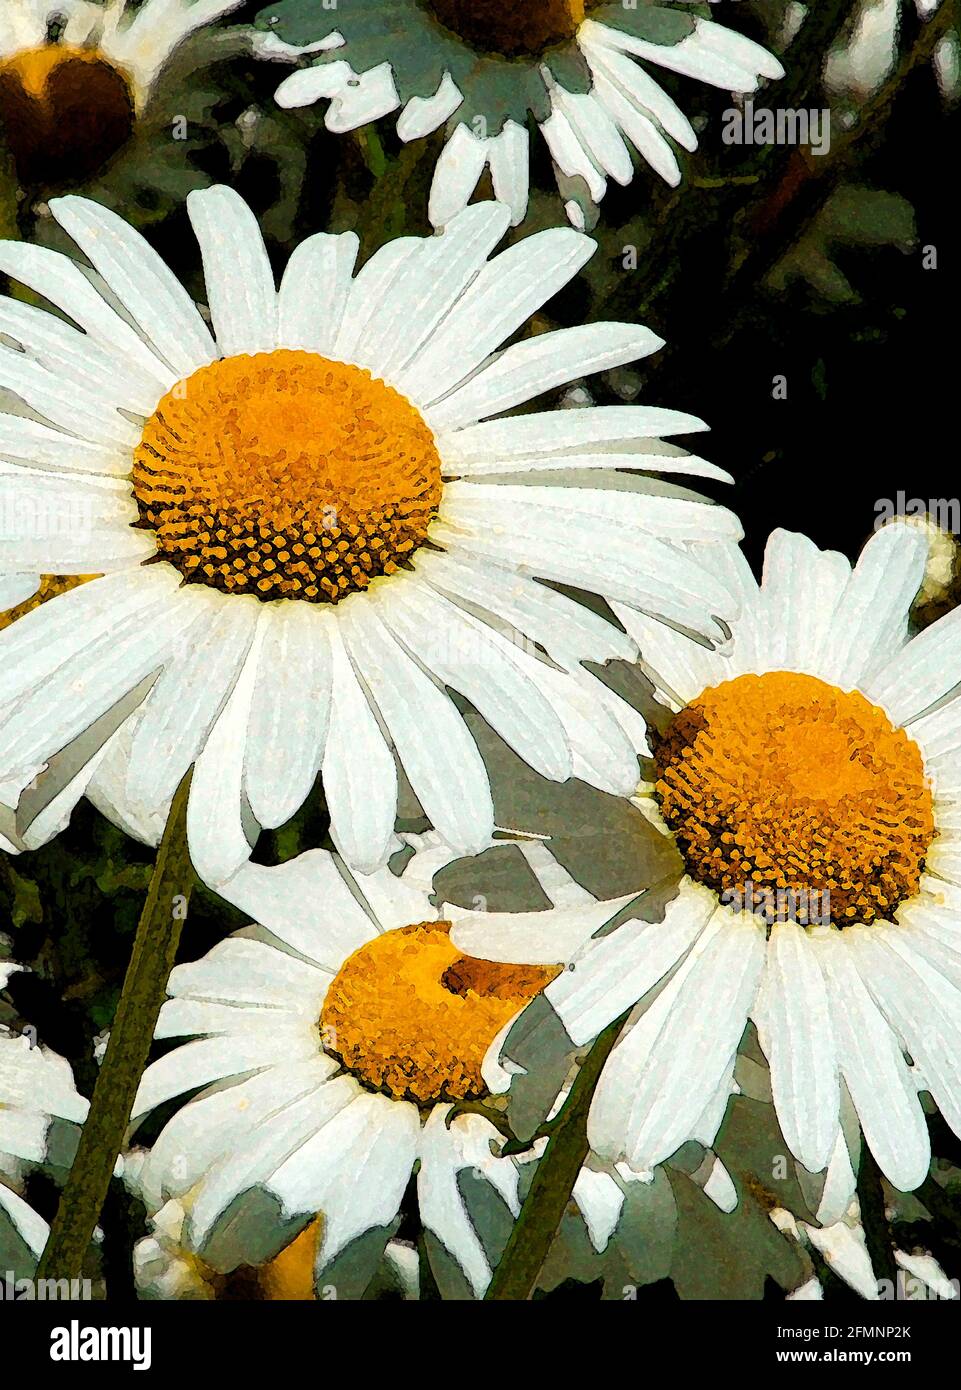 Oxeye Daisy (Leucanthemum vulgare) One of Forty-two Iconic Images of English Garden Flowers, Wildflowers and Rural Landscapes. Stock Photo